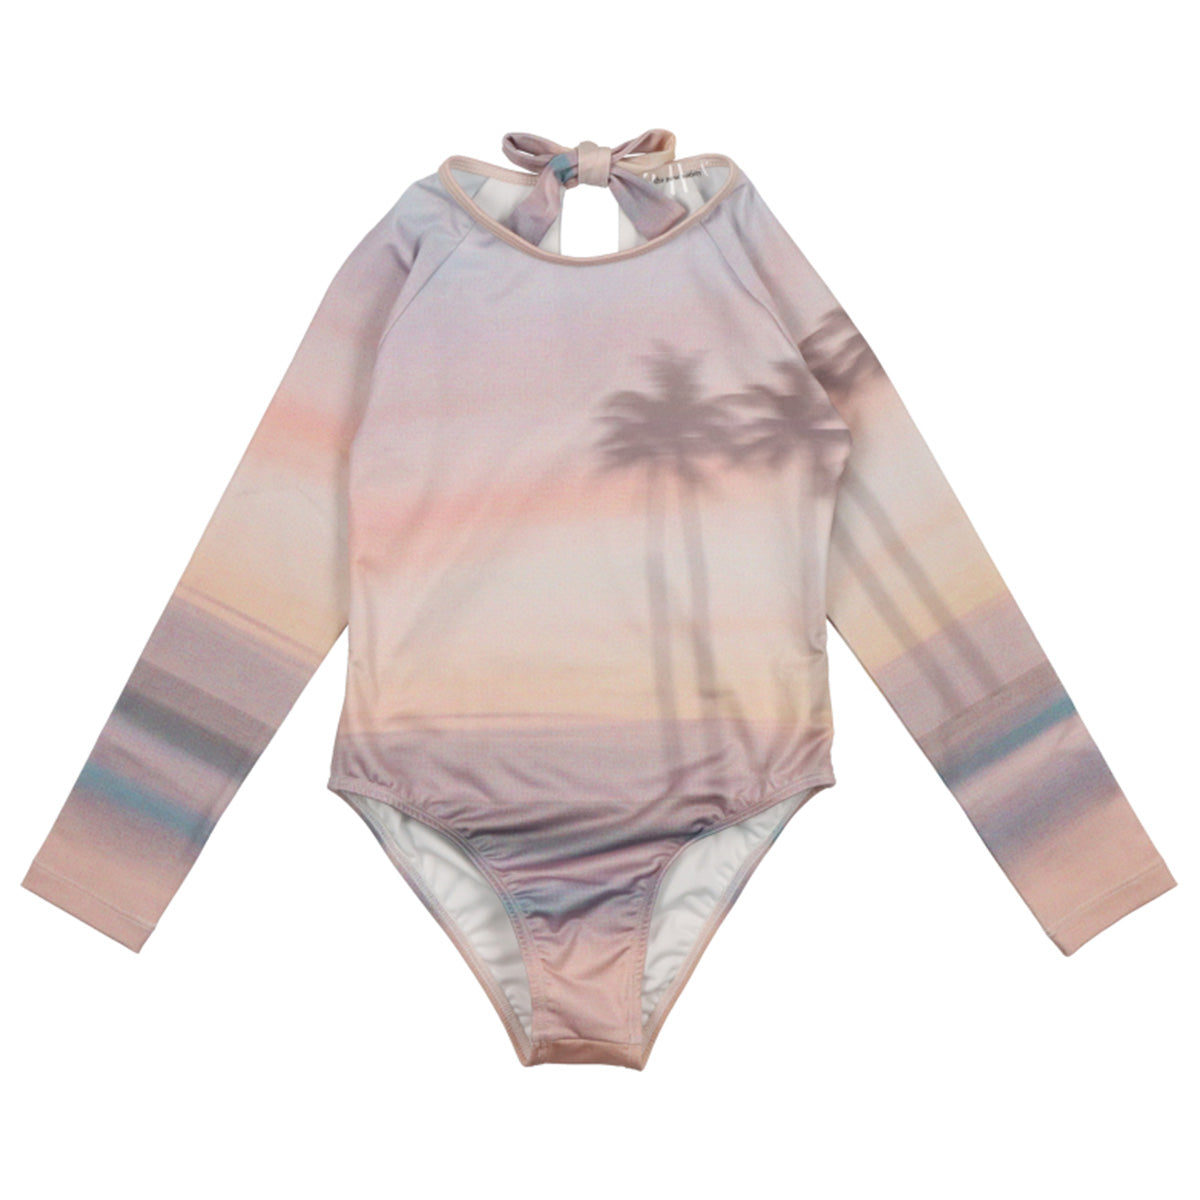 Introducing the Sunset One Piece Swimsuit from The New Society – a stylish choice for your little one’s water adventures.